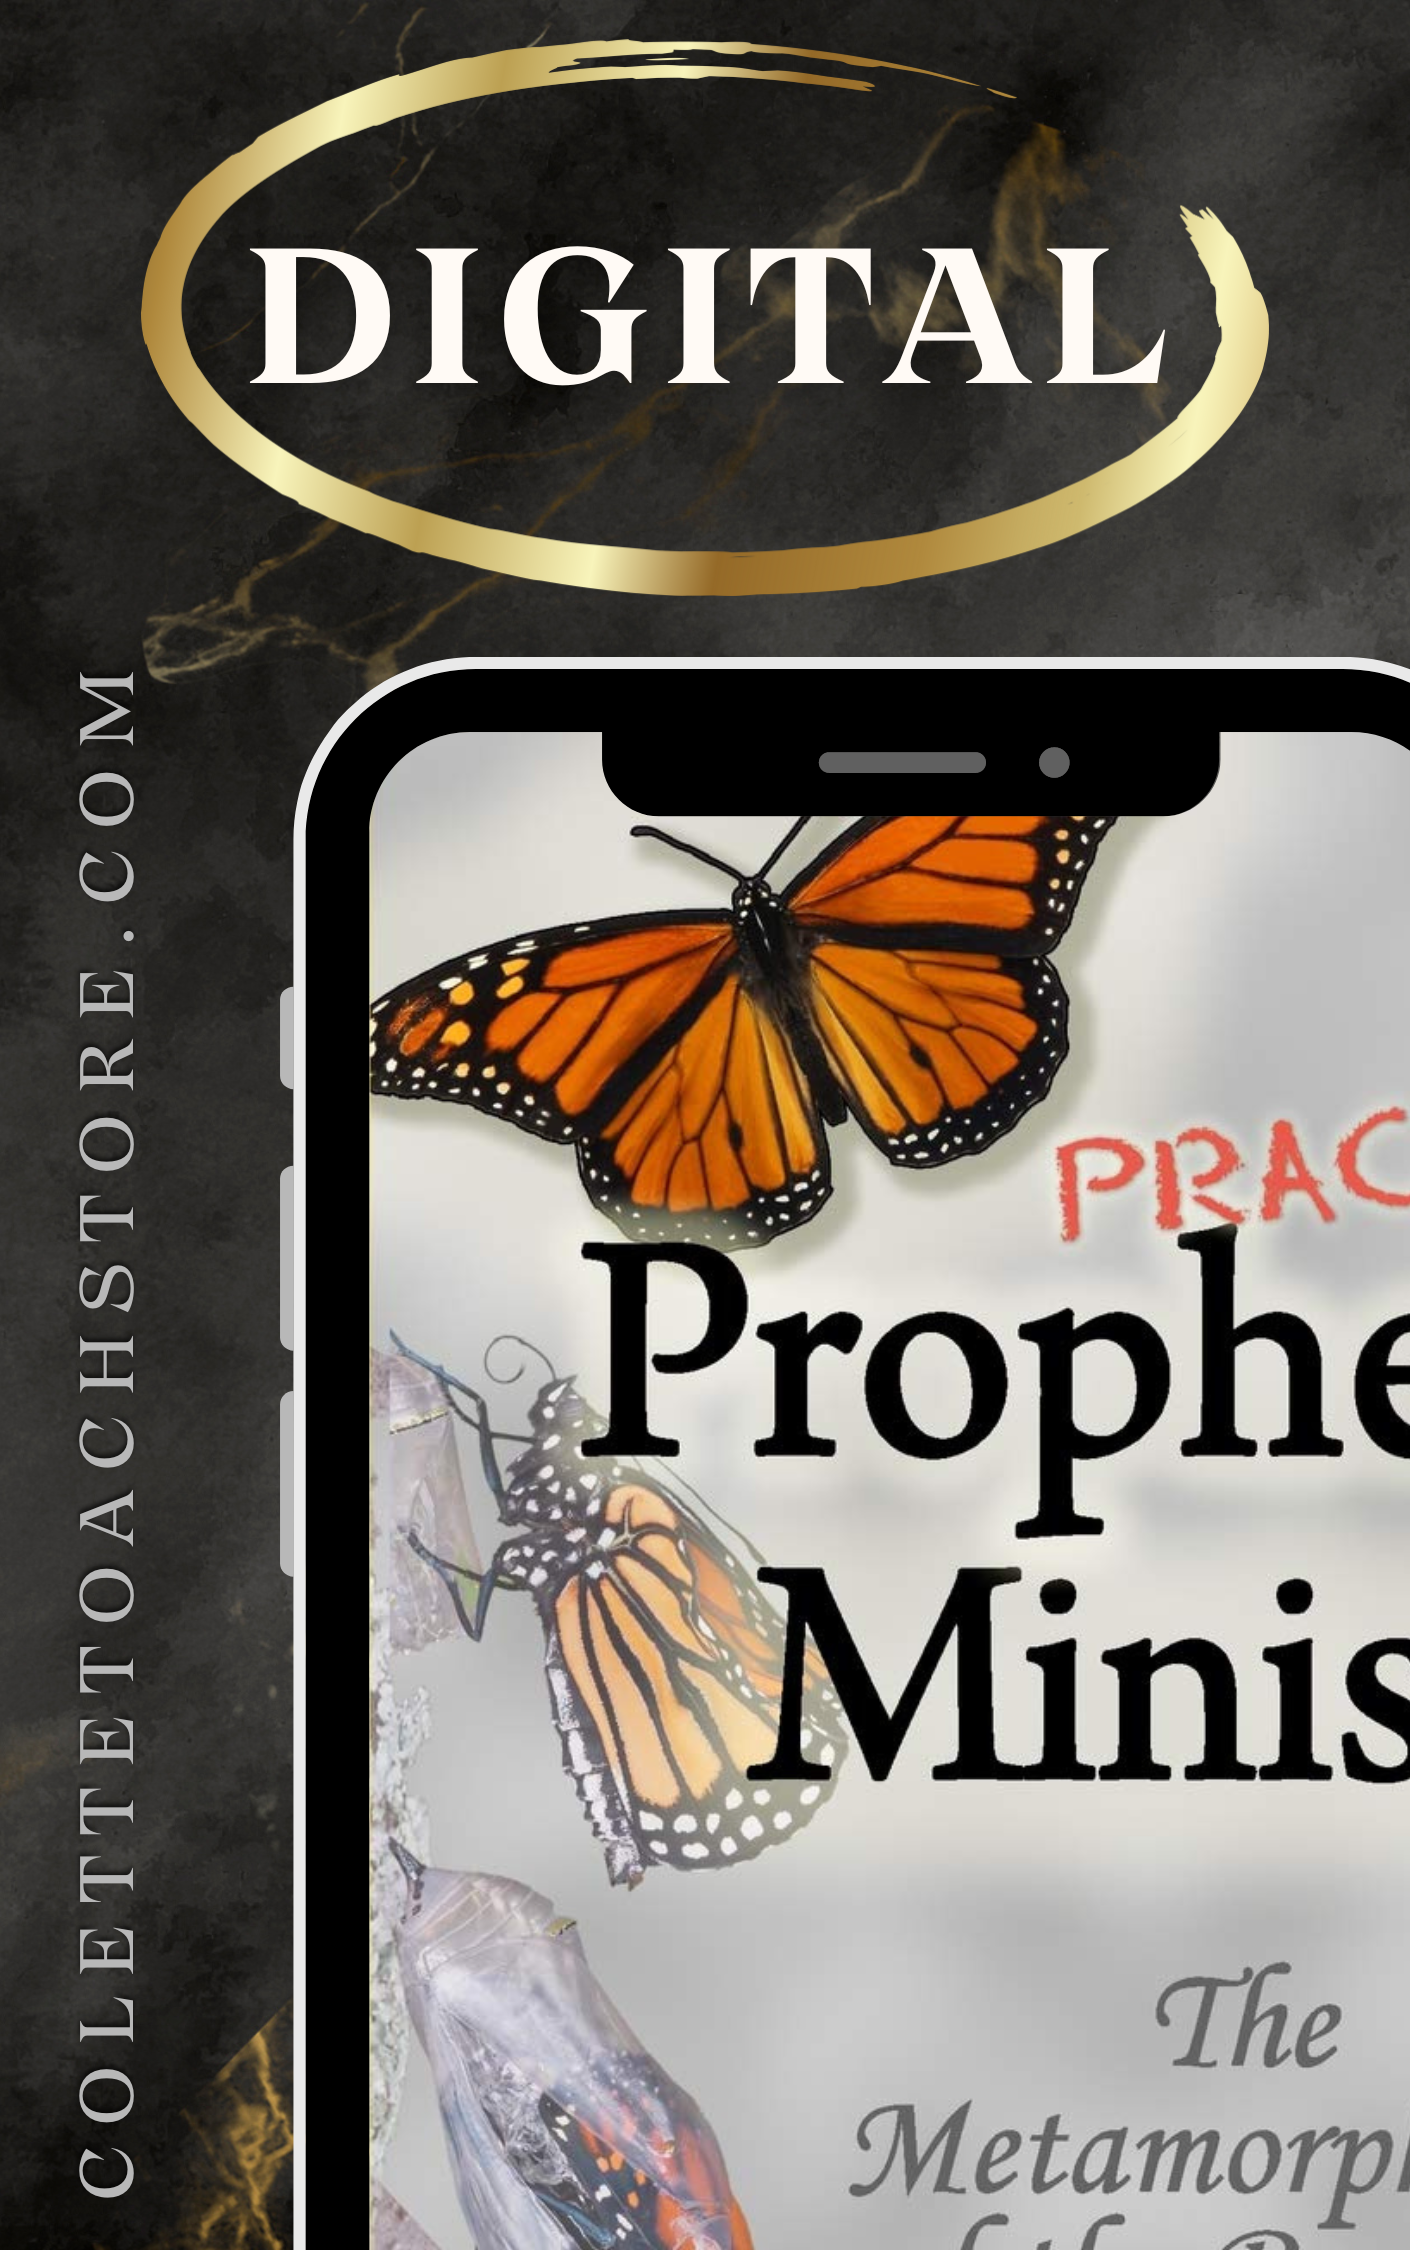 Practical Prophetic Ministry